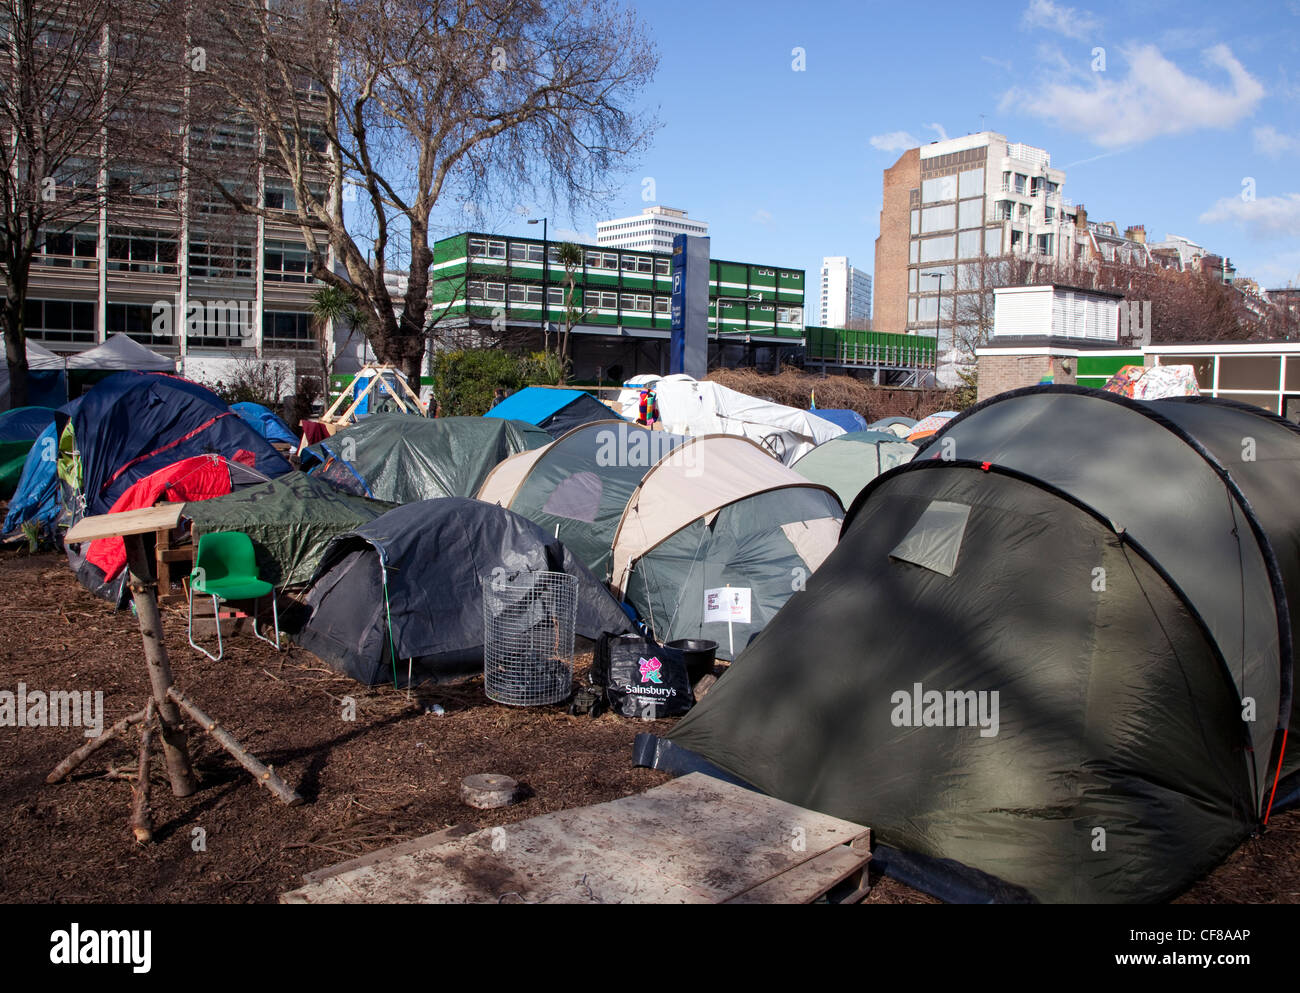 Occupy London tents in Finsbury Square, London Stock Photo